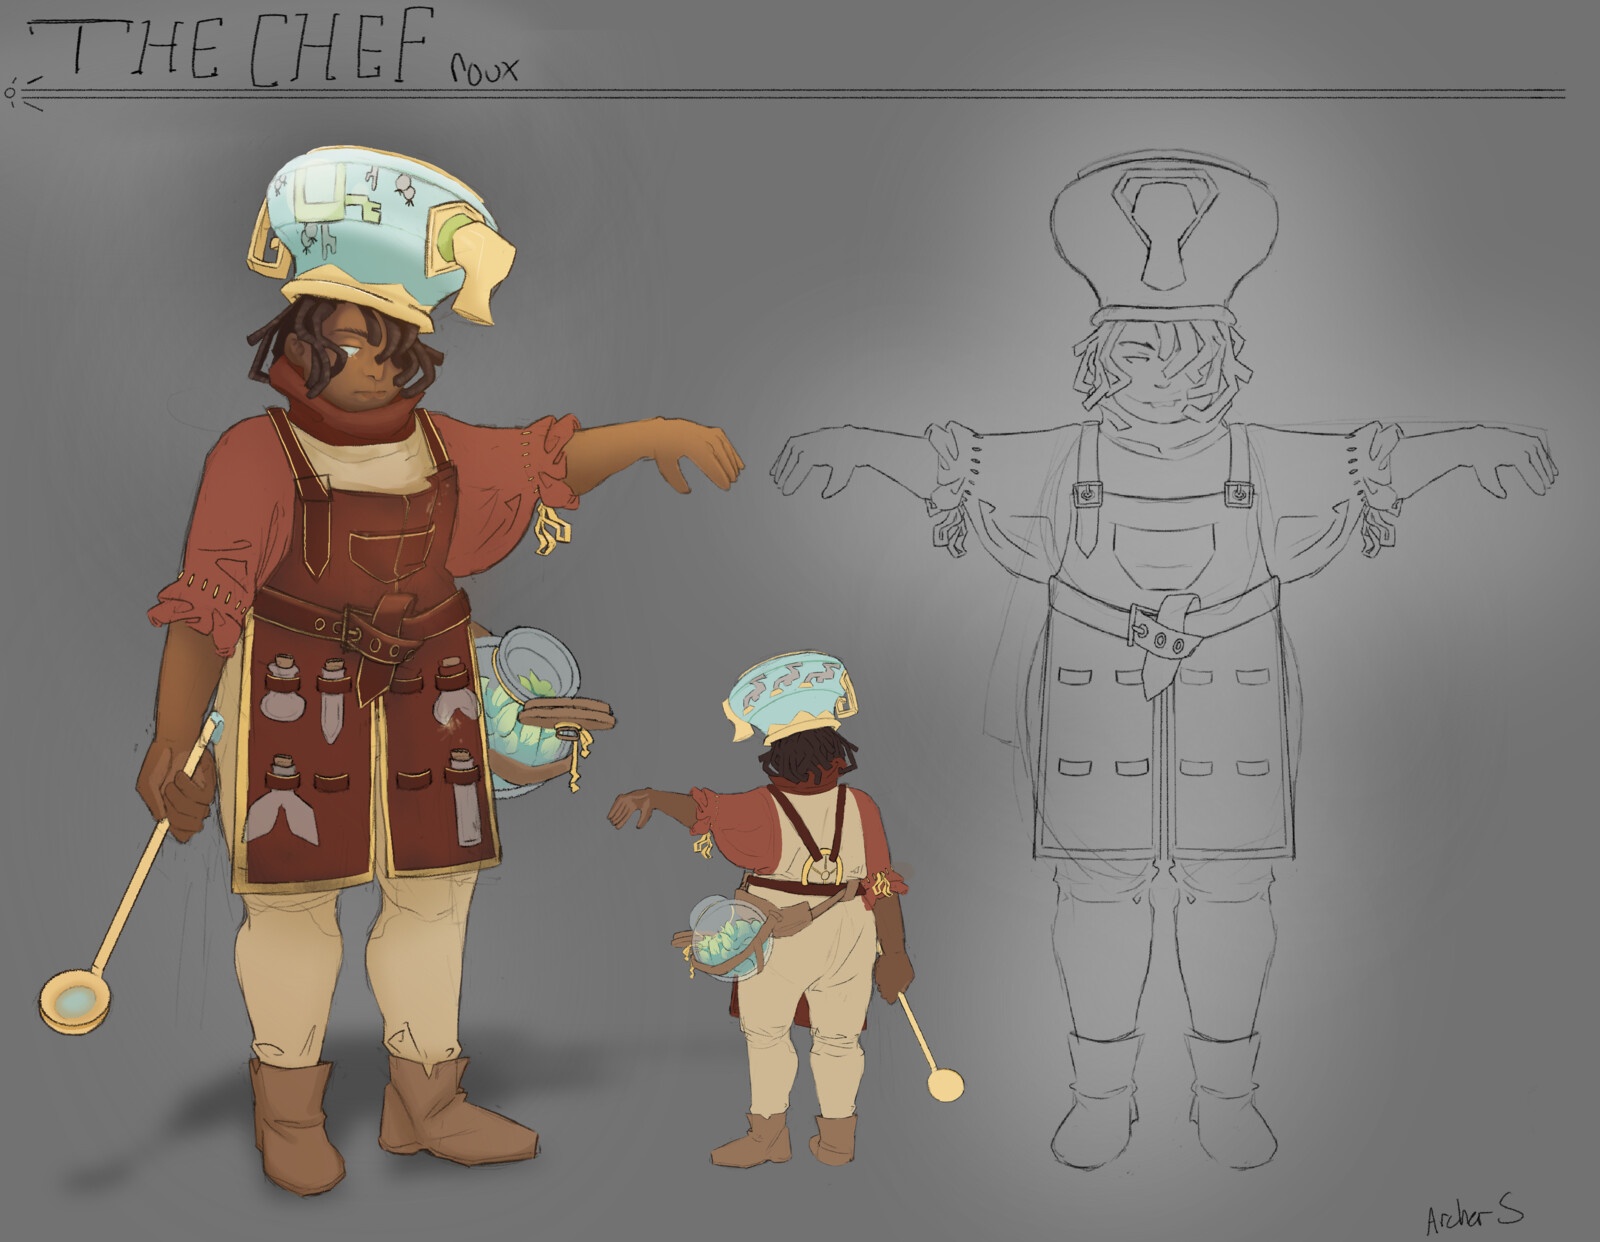 Final Concept for Roux. In order to survive the outlands, humans must make magical pacts with beasts to survive. She has made the pact of the Chef. Roux has promised her mount that he will never go hungry as long as she is with him.